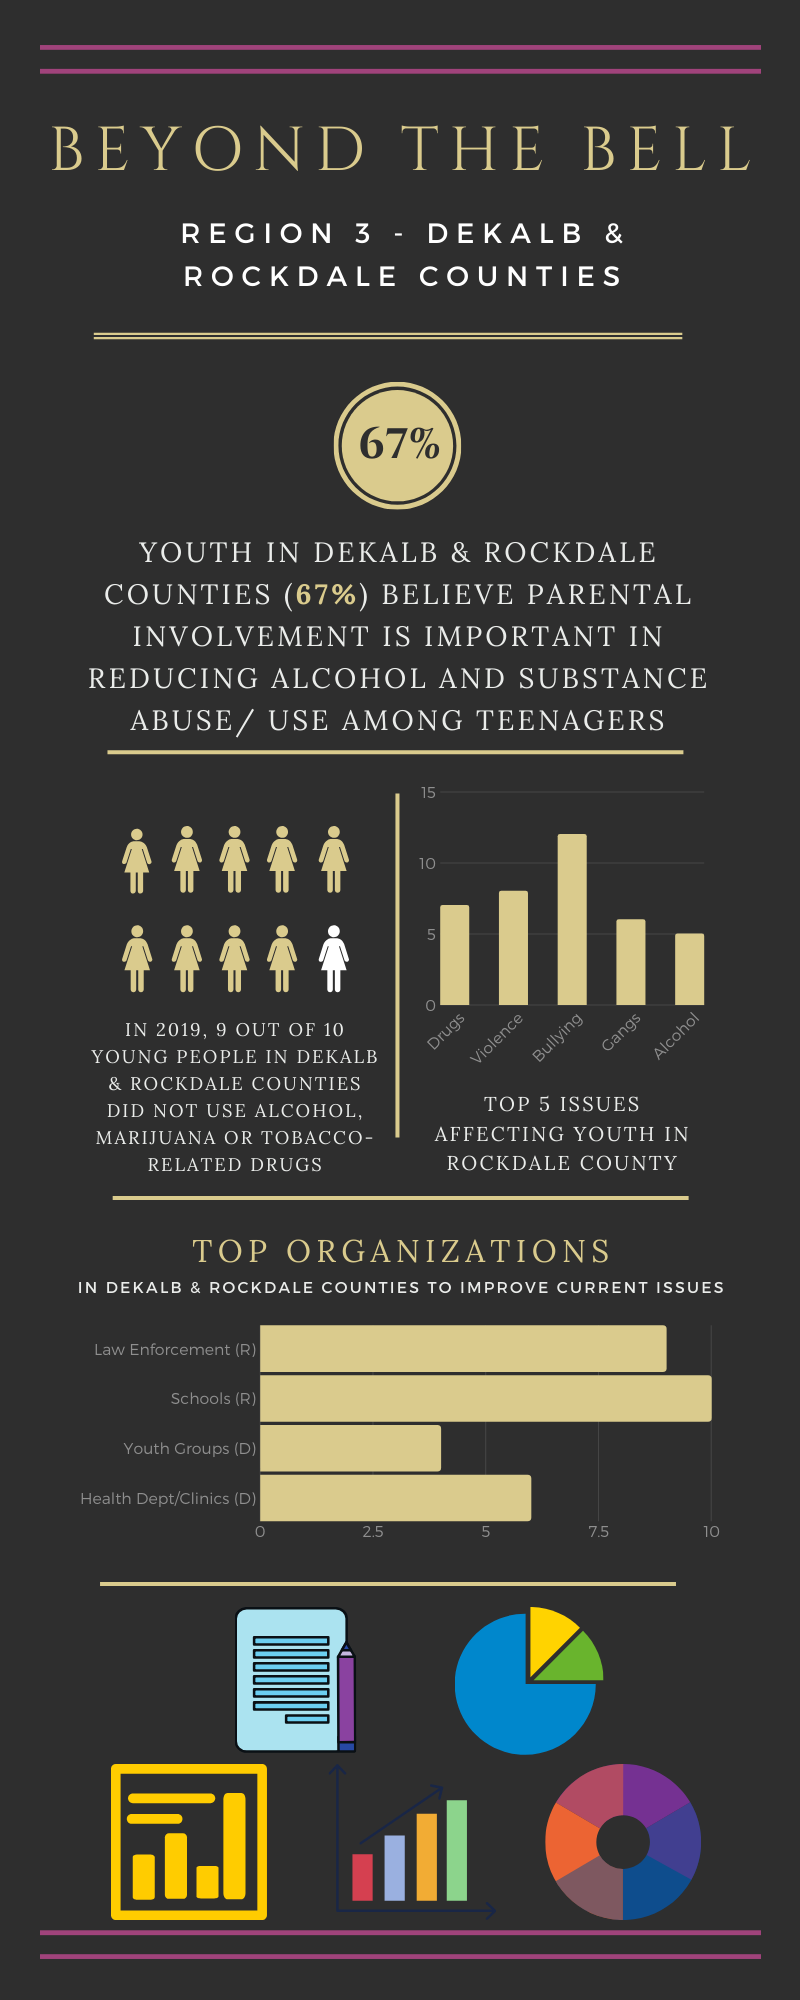 Infographic featuring statistics regarding substance abuse in DeKalb & Rockdale Counties. 67% of youth believe parental involvement is important in reducing substance abuse among teenagers. In 2019, 9 out of 10 young people did not use drugs. Drugs, violence, bullying, gangs, and alcohol  are the top 5 issues affecting youth.Law Enforcement, schools, youth groups, and health clinics are the top organizations working to improve issues.